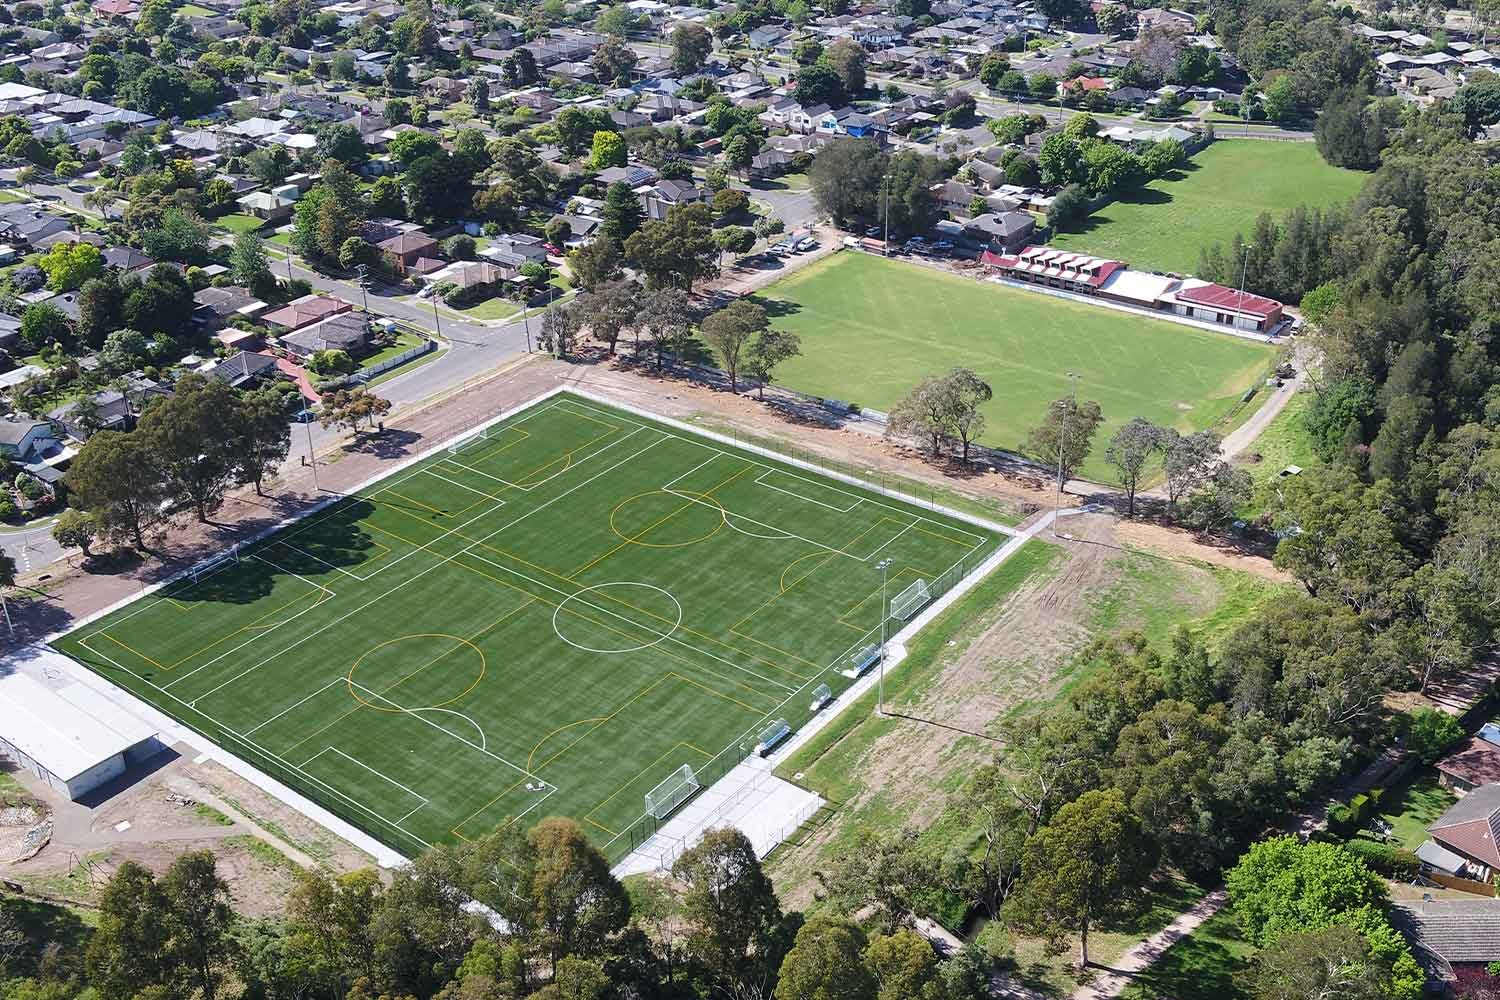 Aerial view of an outdoor soccer sports field with a synthetic turf surface and white and yellow line markings